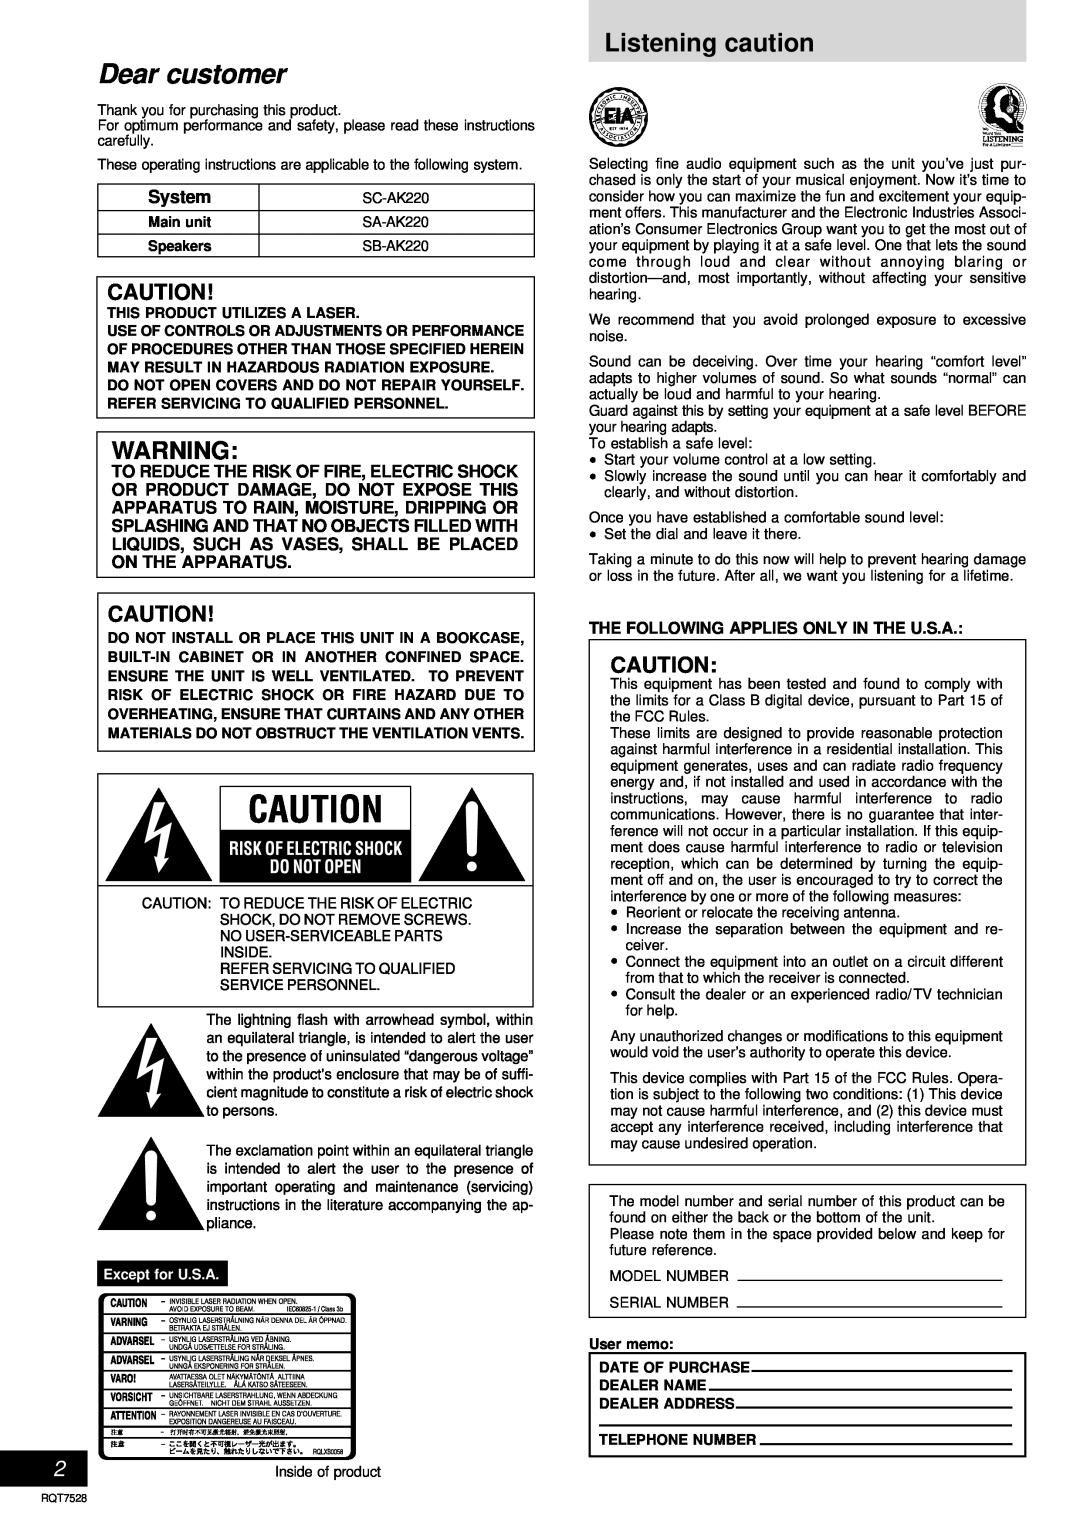 Panasonic SC-AK220 operating instructions Listening caution, System, Dear customer, Except for U.S.A 